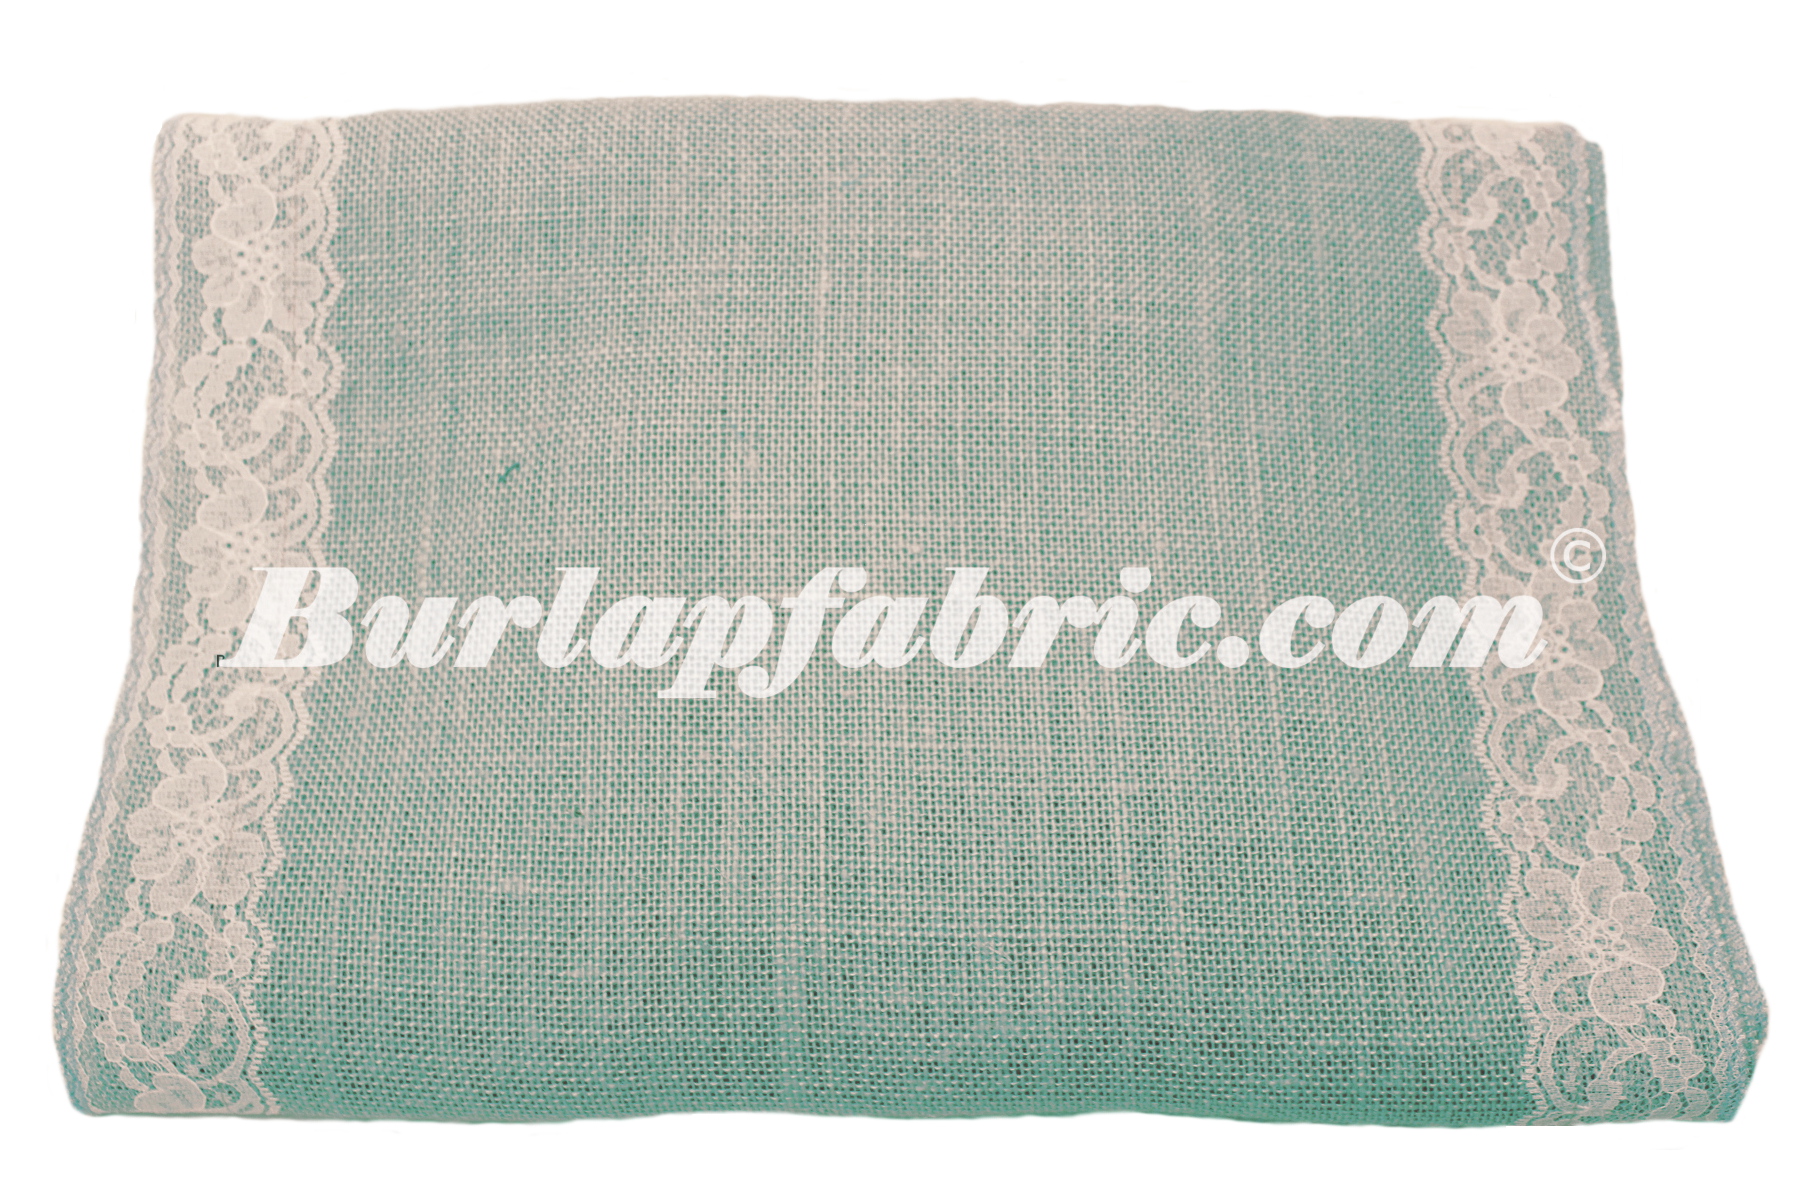 14" Light Blue Burlap Runner with 2" White Lace Borders - Click Image to Close